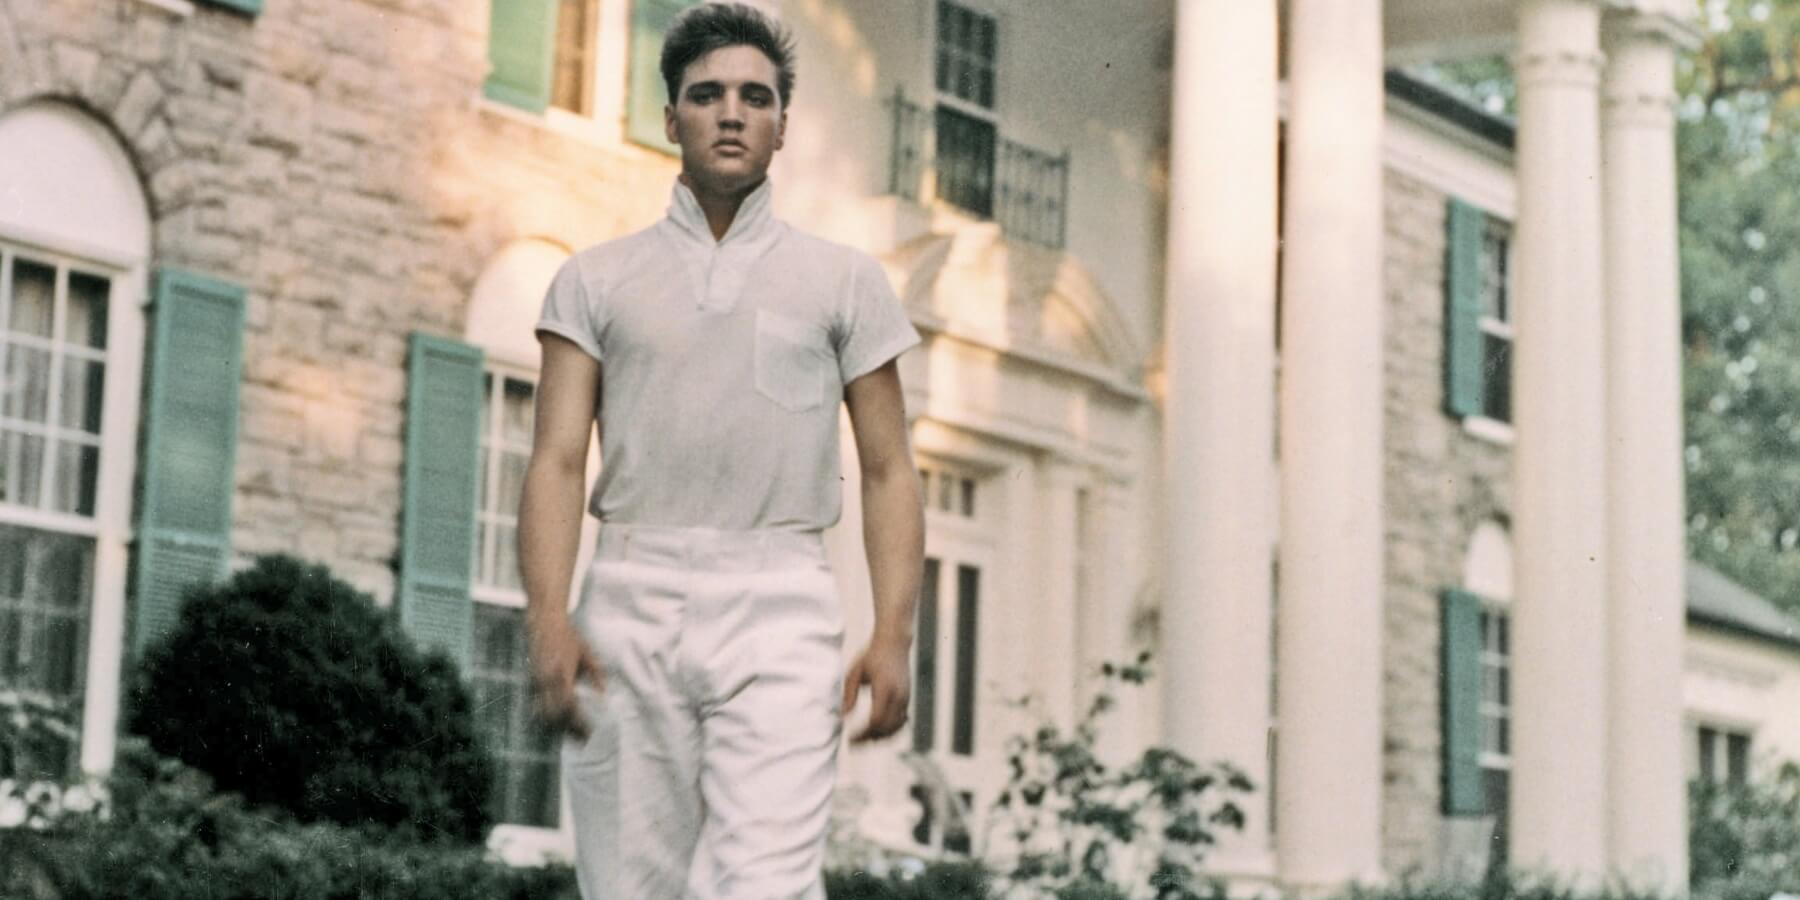 Elvis Presley poses outside of Graceland in Memphis, Tennessee